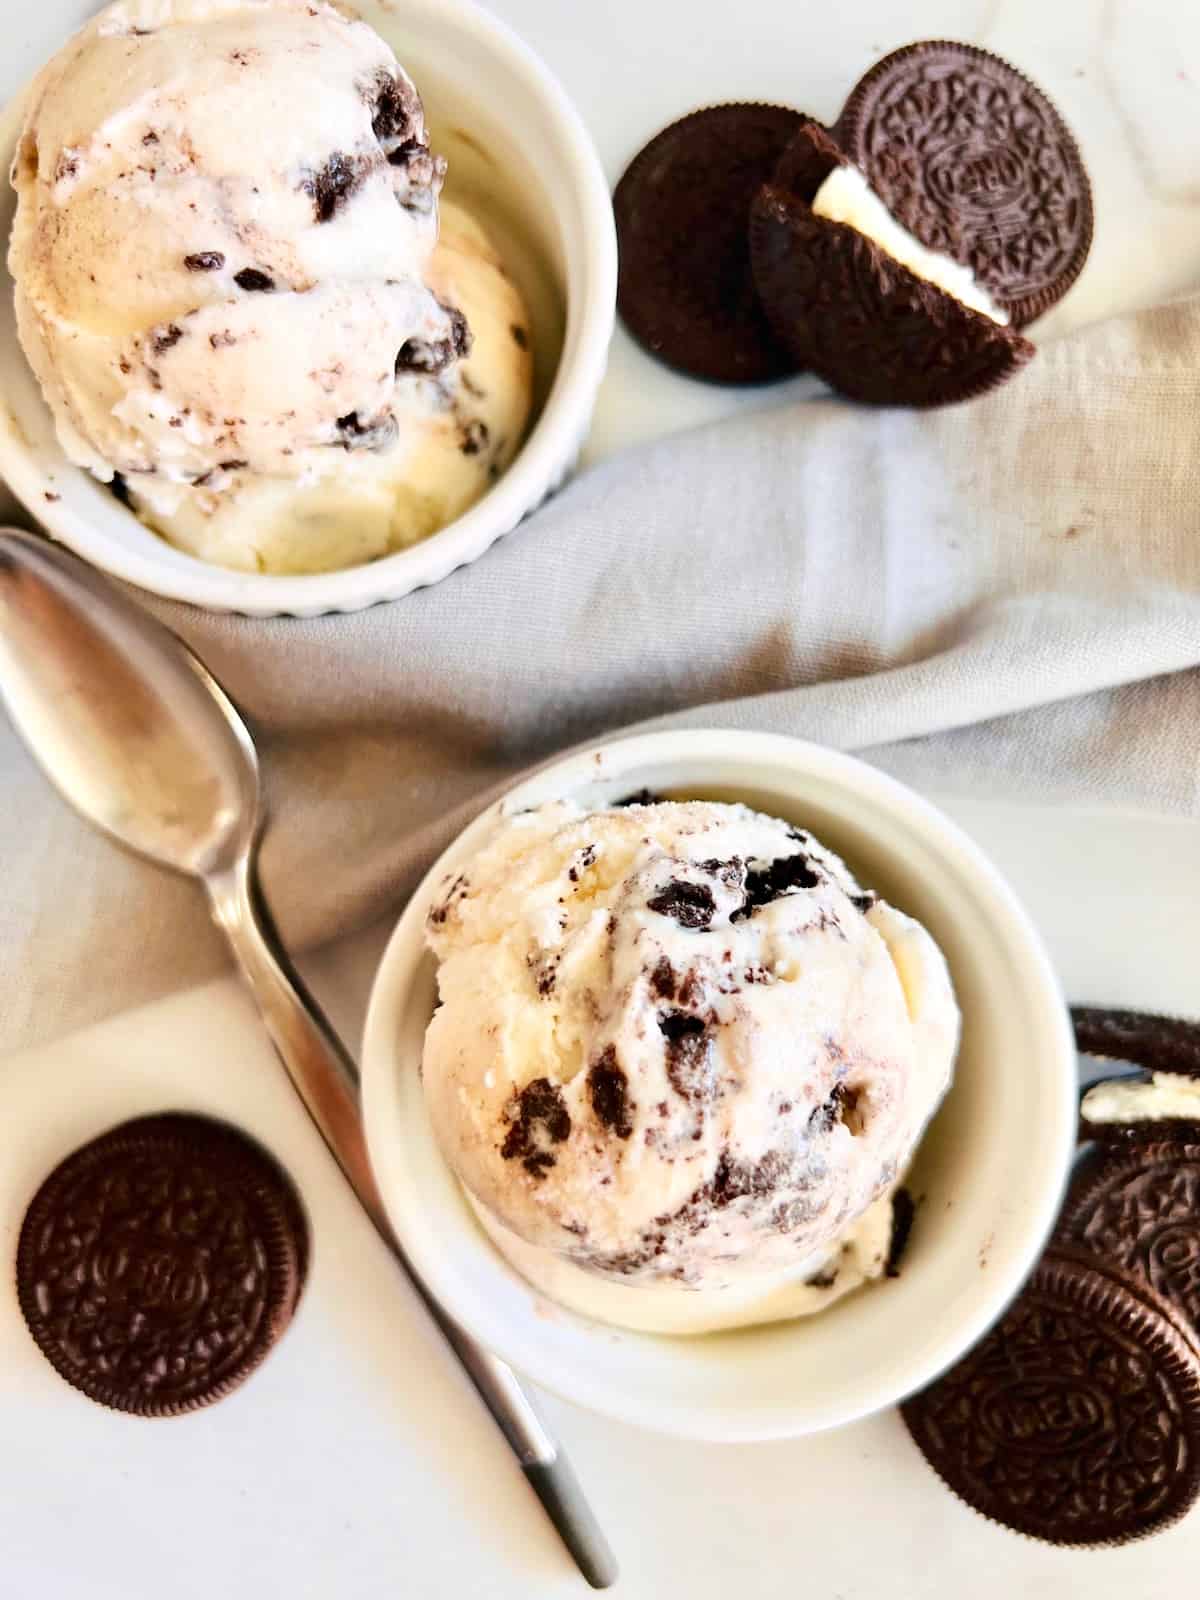 Vanilla ice cream with Oreo cookies made from scratch served in white dishes next to sandwich cookies and spoon.